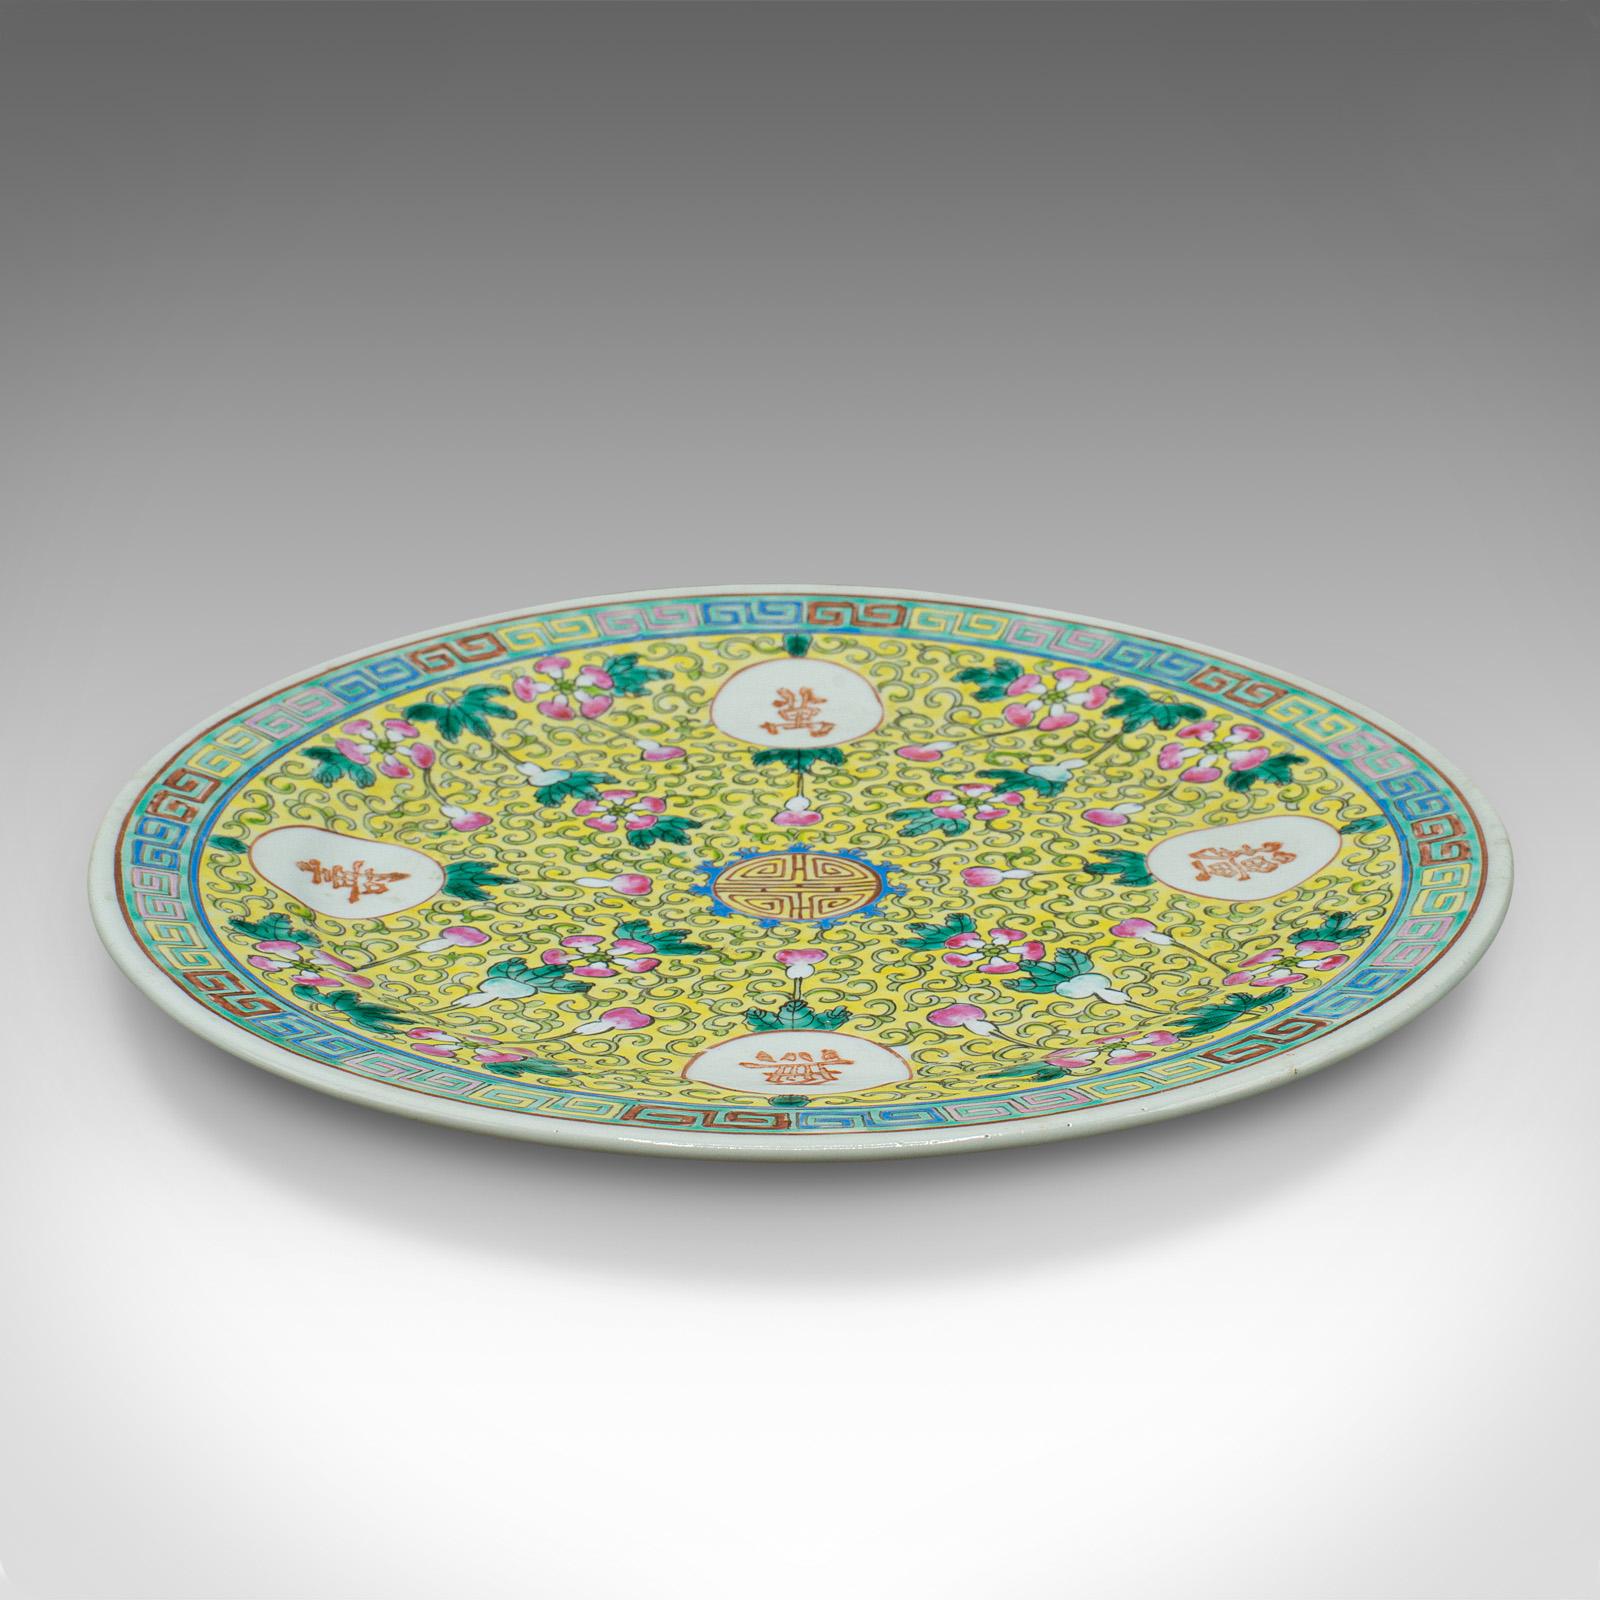 This is an antique Famille Jaune decorative plate. A Chinese, ceramic display dish, dating to the late Victorian period, circa 1900.

Charming example of the Famille Jaune taste
Displays a desirable aged patina and in good order
Vibrant yellow